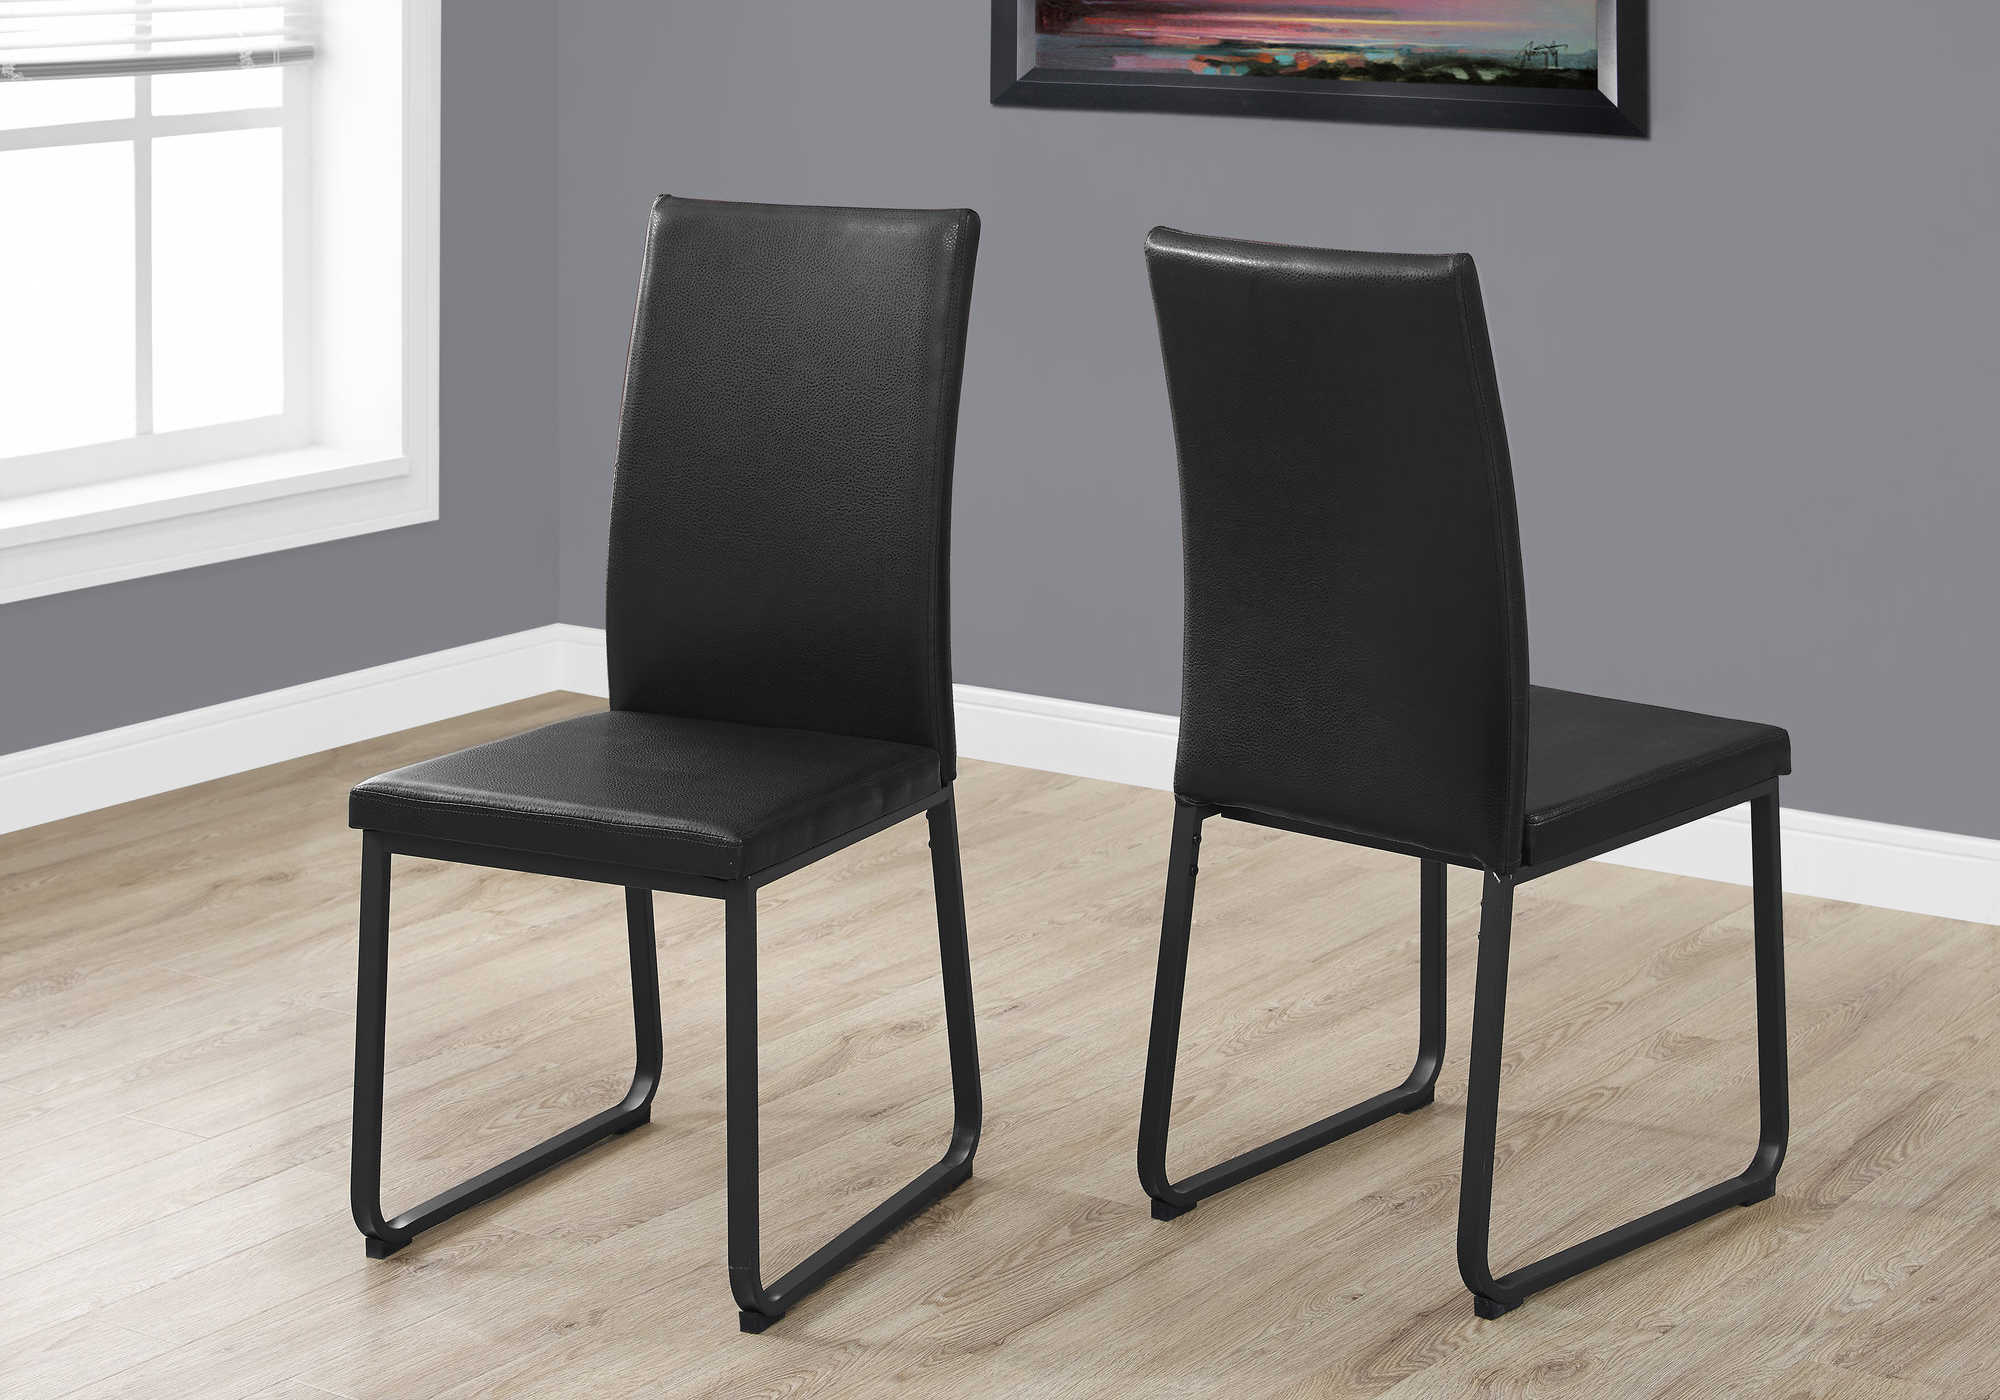 DINING CHAIR - 2PCS / 38"H / BLACK LEATHER-LOOK / BLACK